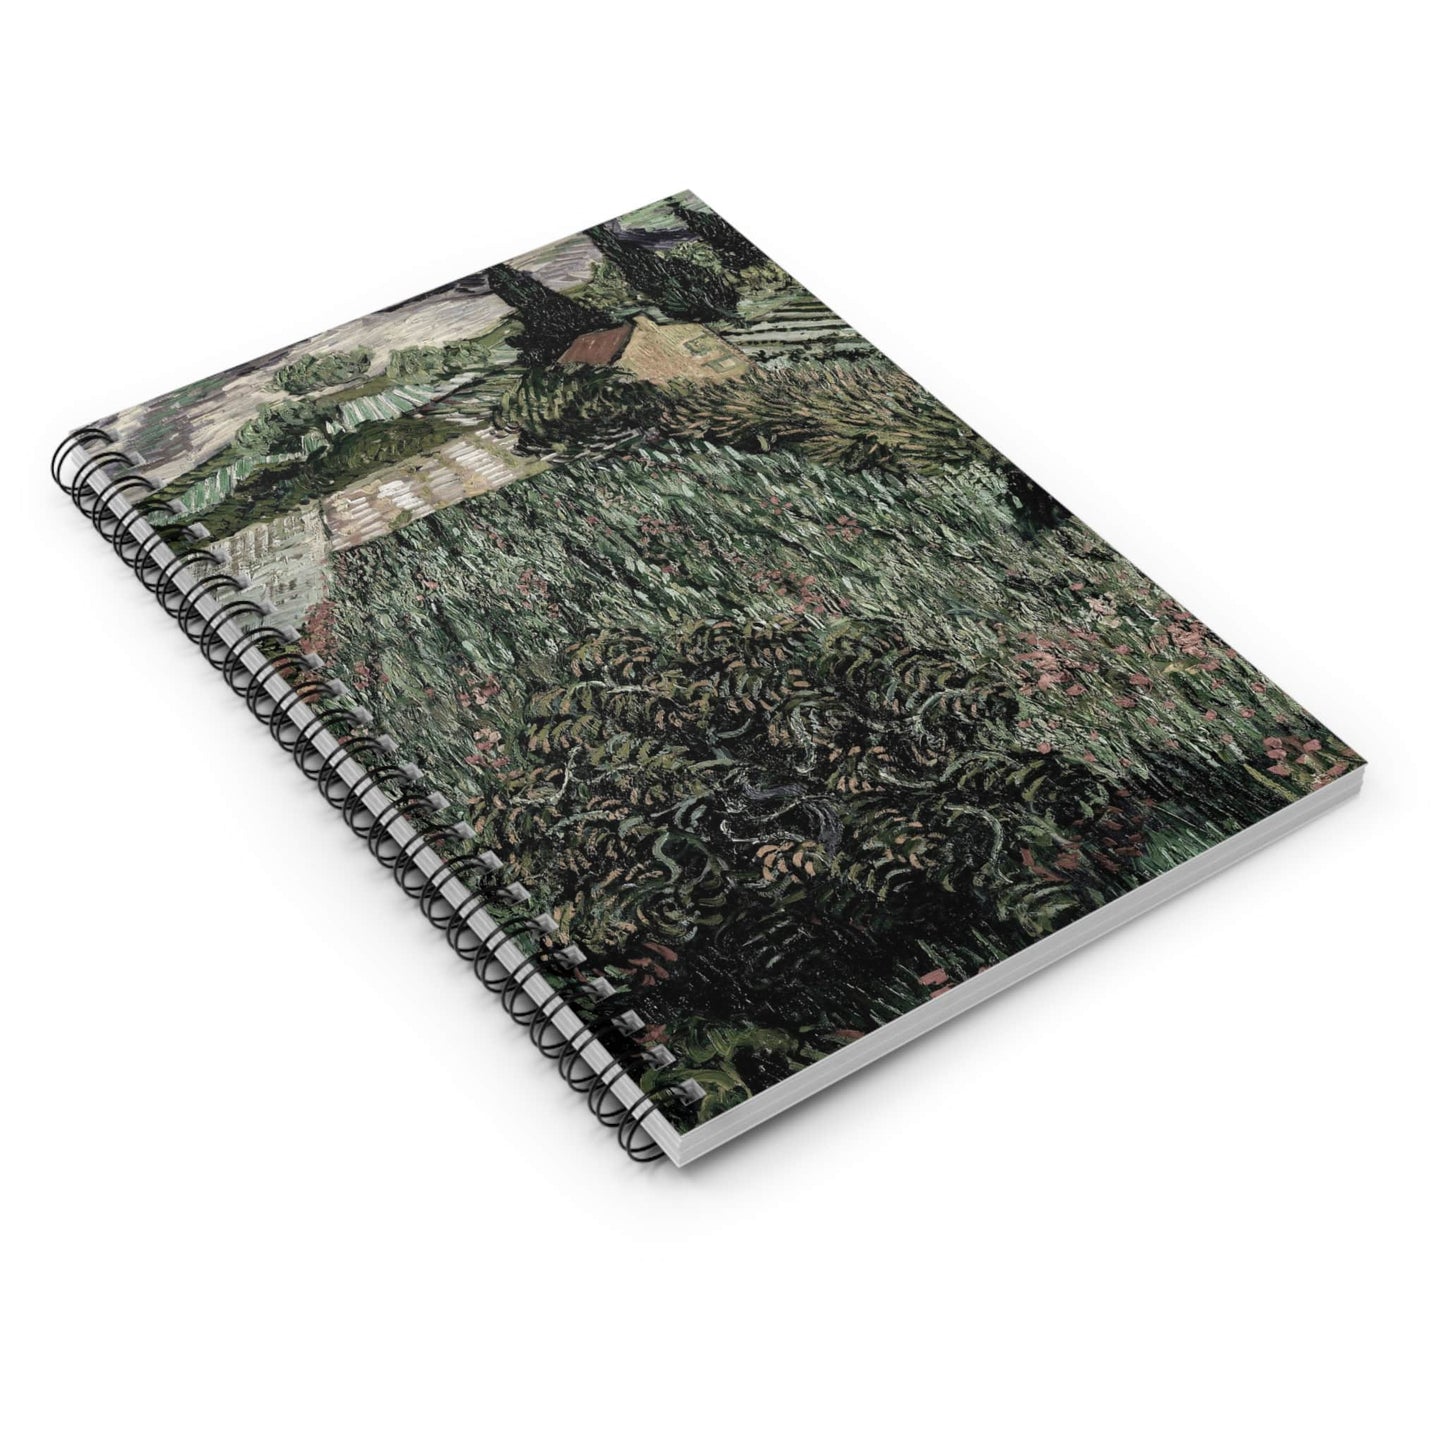 Vintage Landscape Spiral Notebook Laying Flat on White Surface